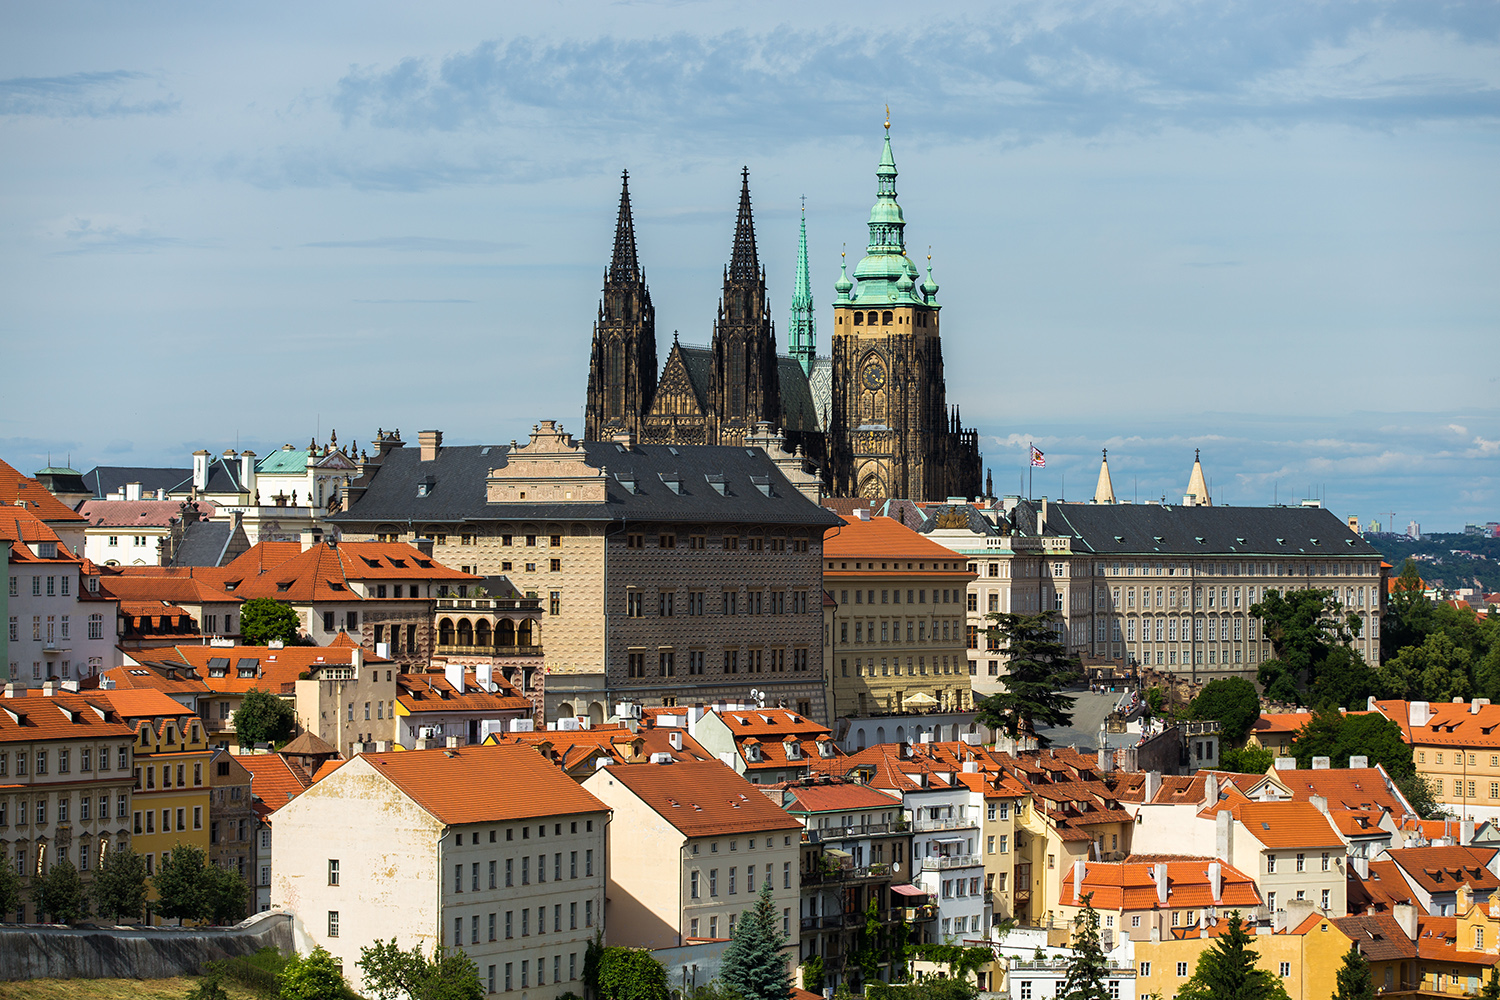 Prague Castle is the biggest coherent castle complex in the world